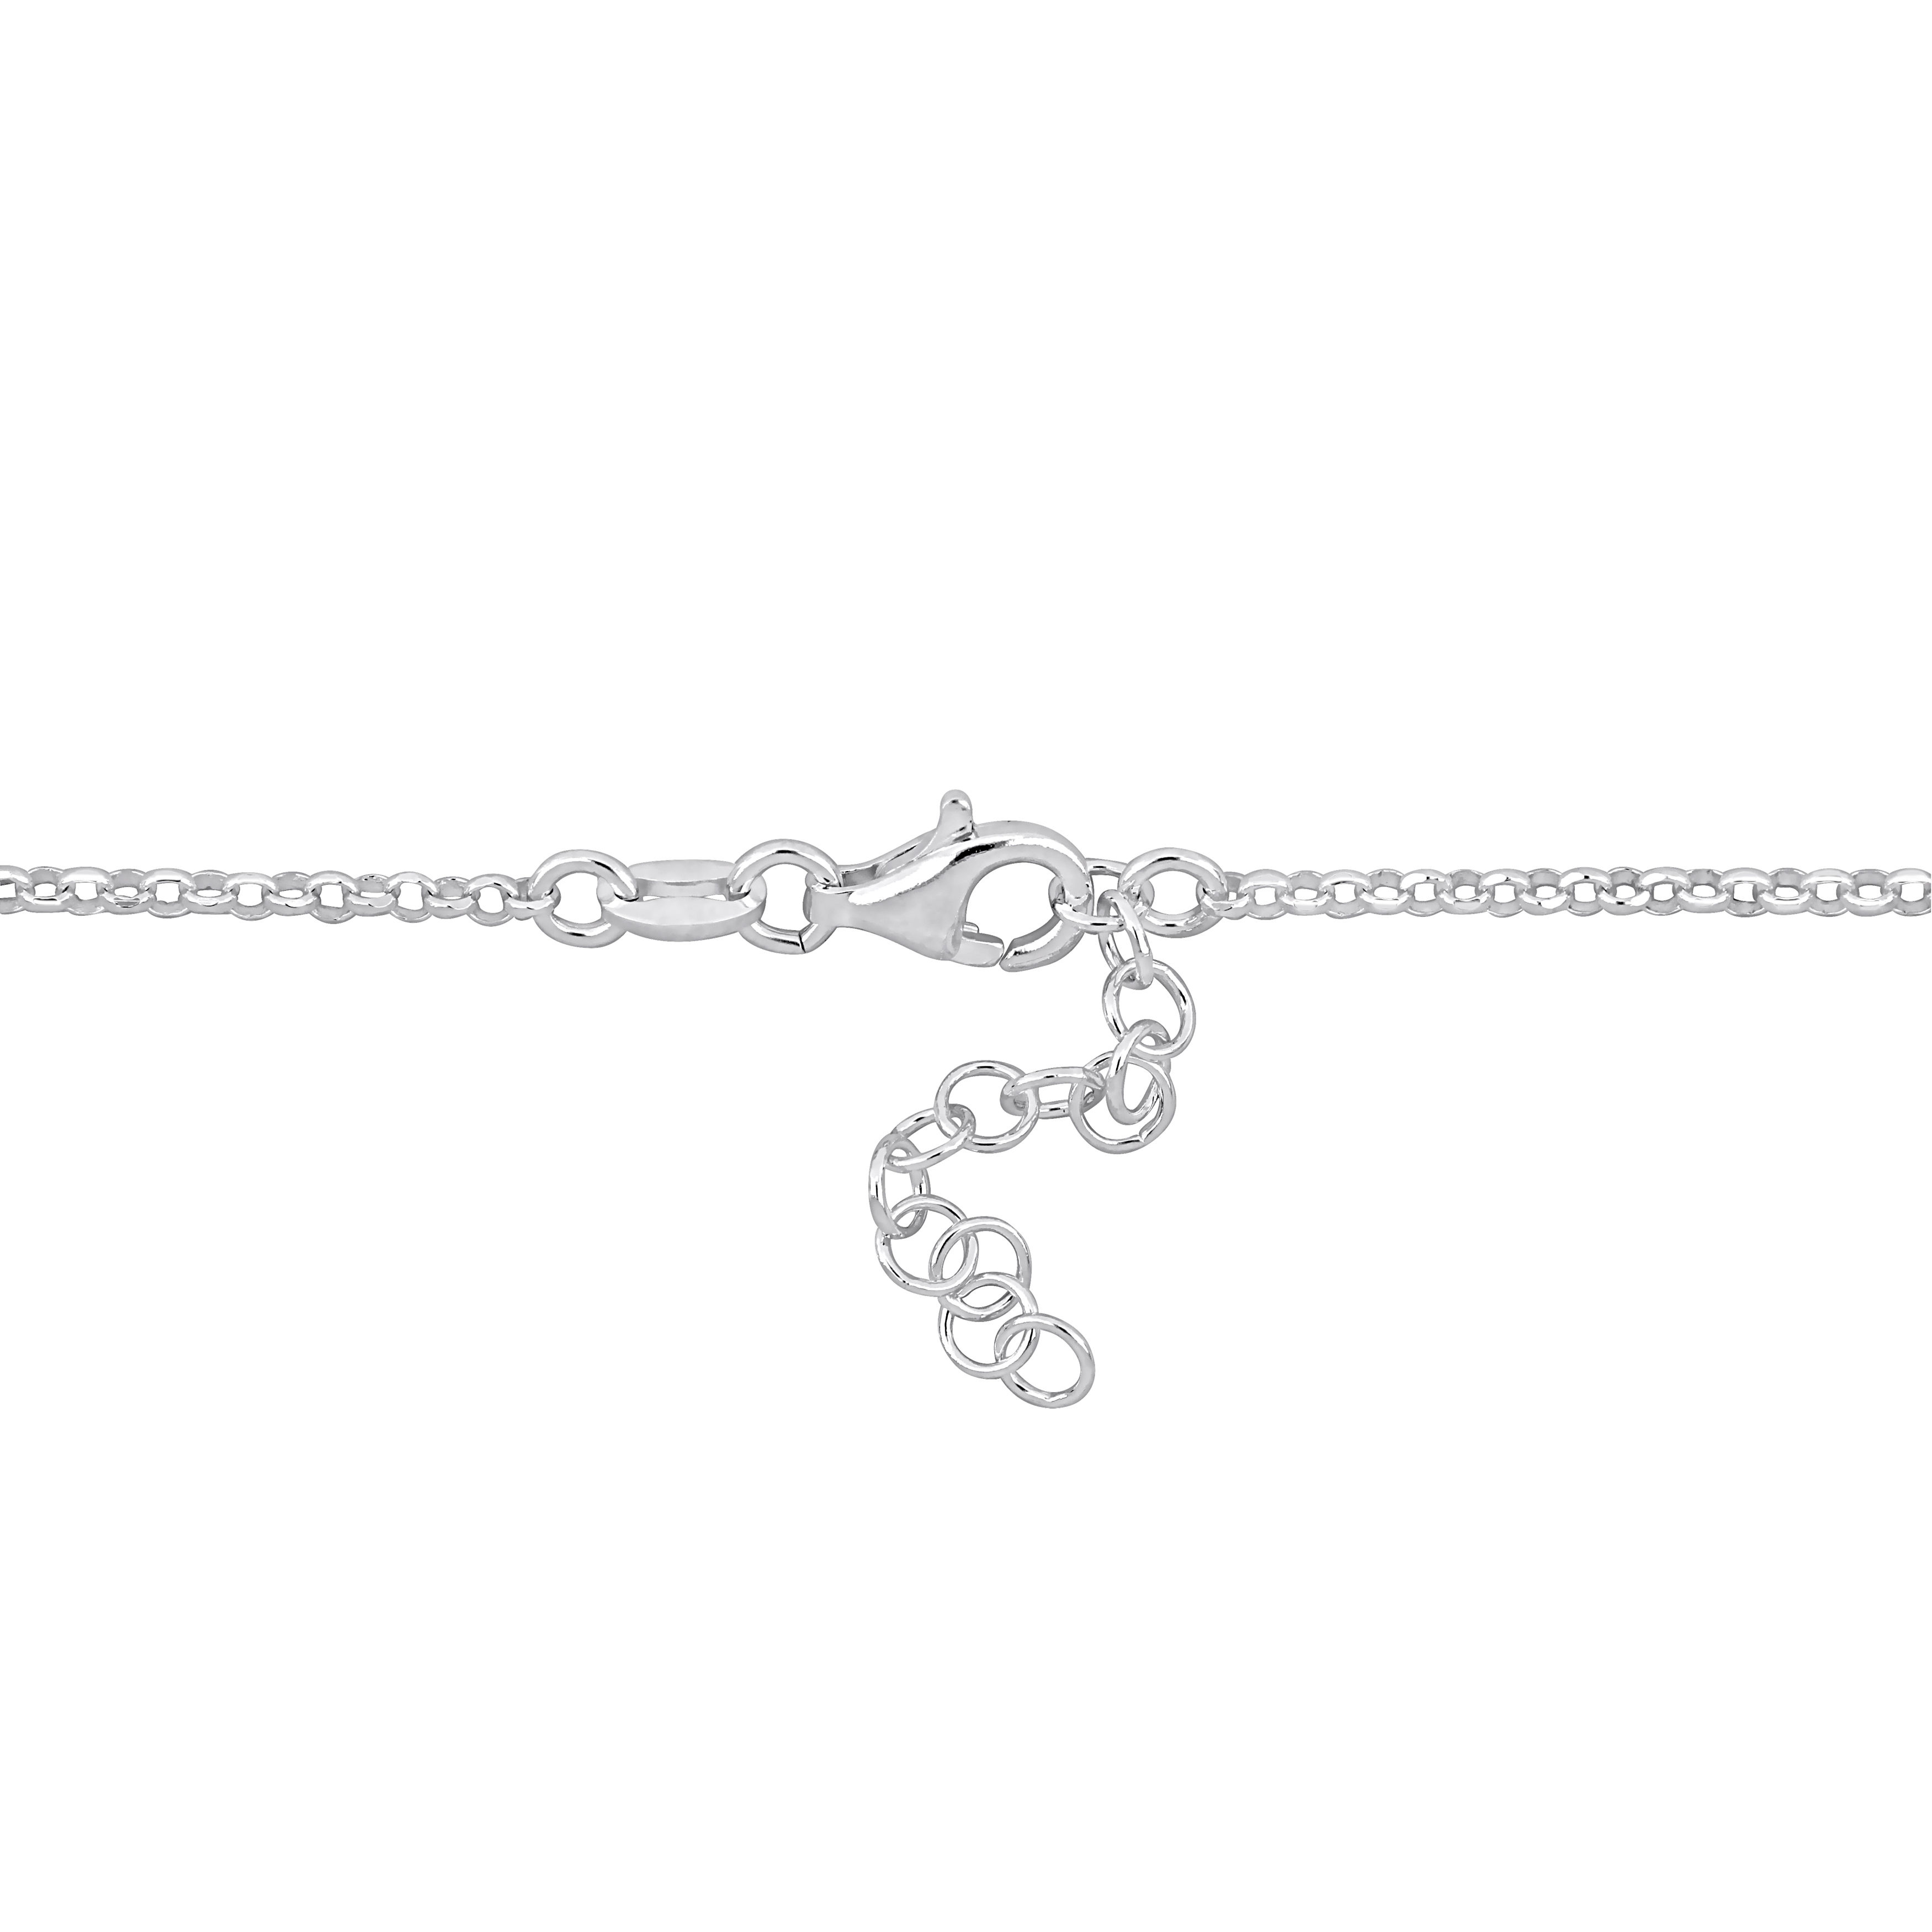 Pink Heart Charm Station Bracelet in Two-Tone Sterling Silver - 7+1 in.